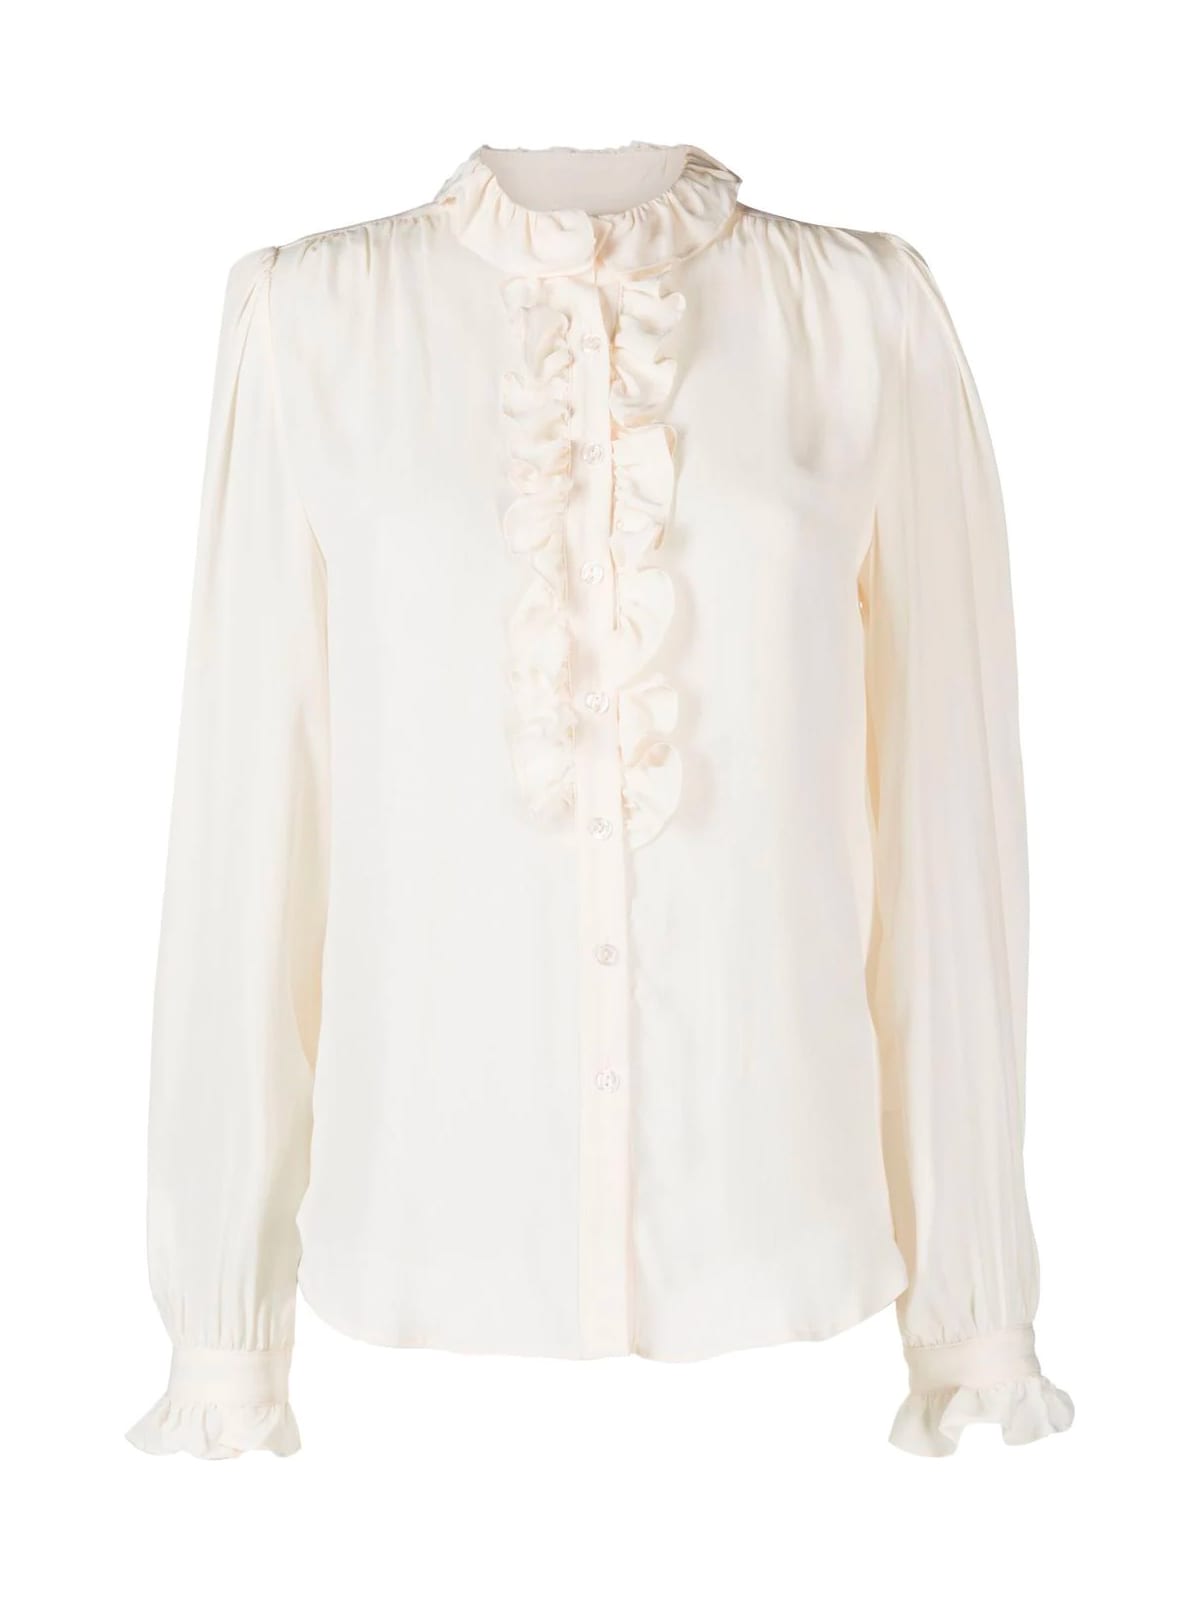 TwinSet Blouse Neck Rouches Detail